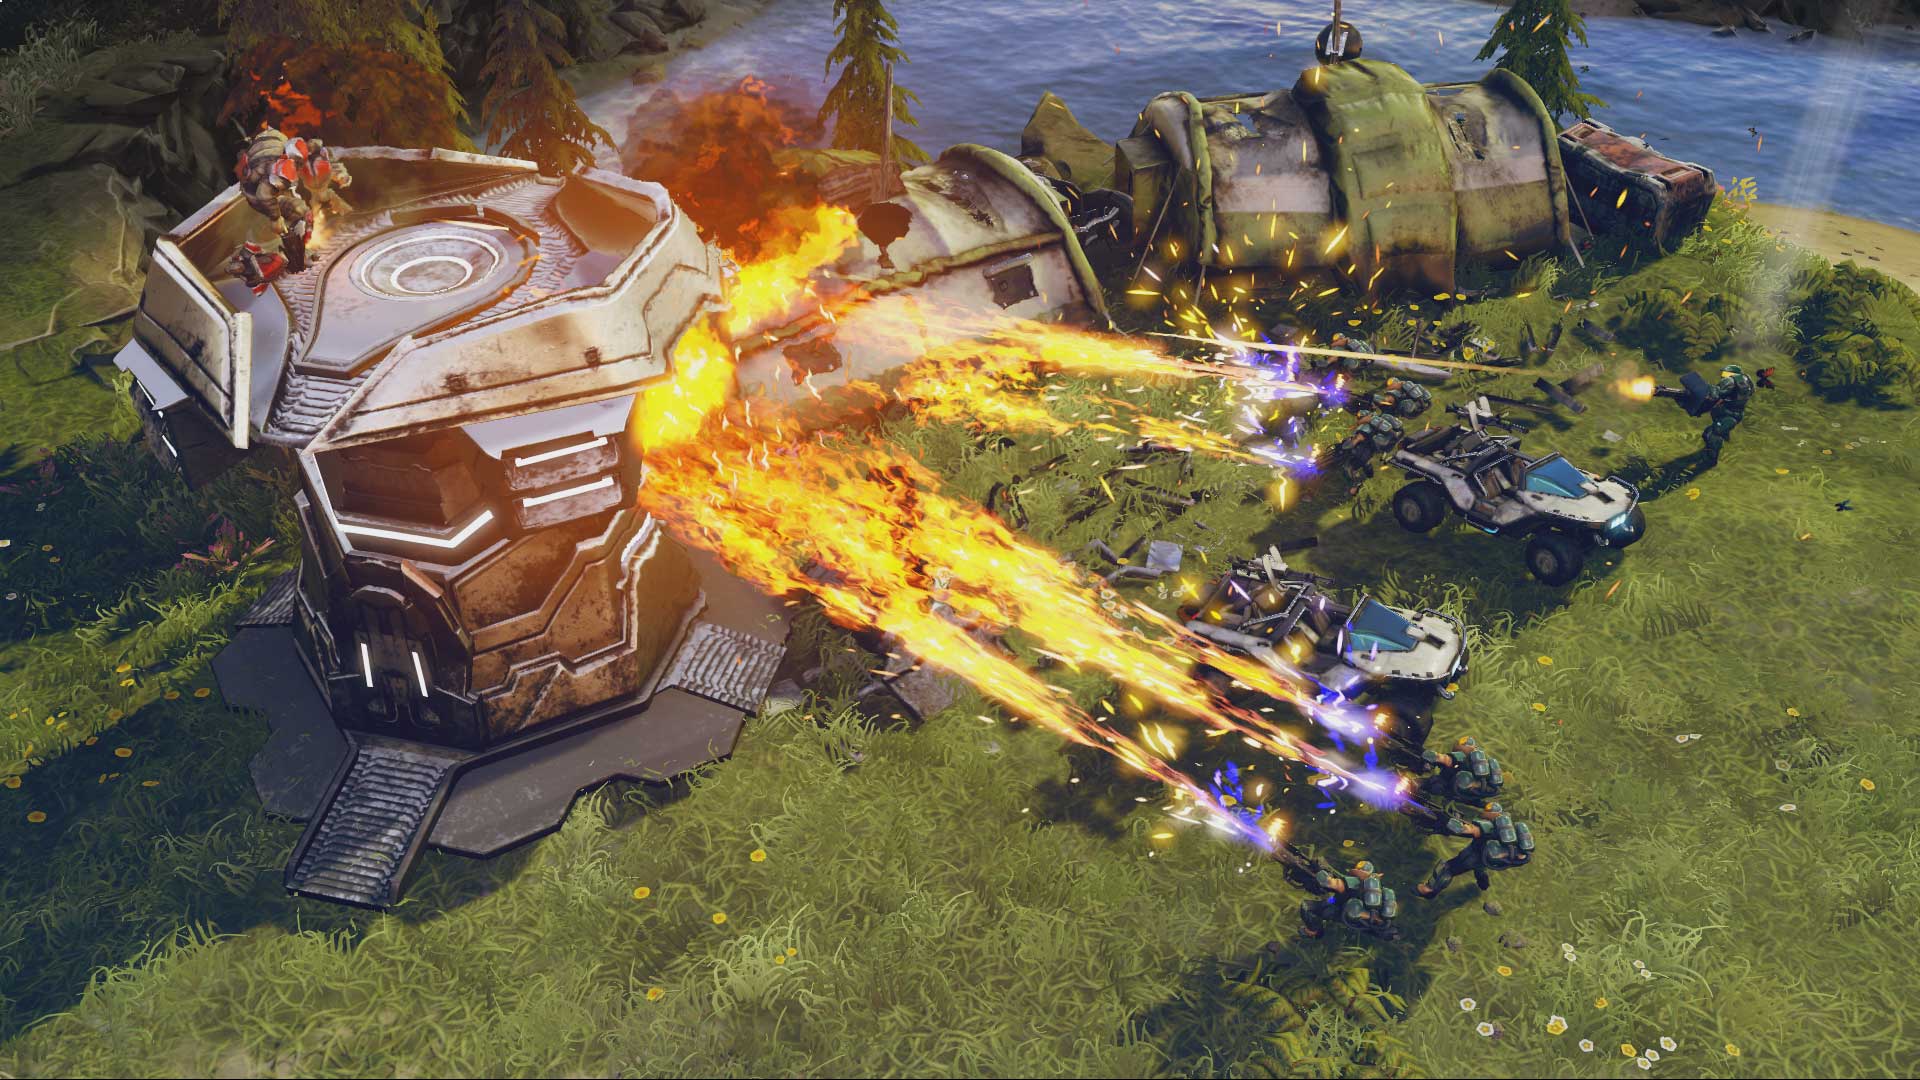 Shooting fire in Halo Wars 2